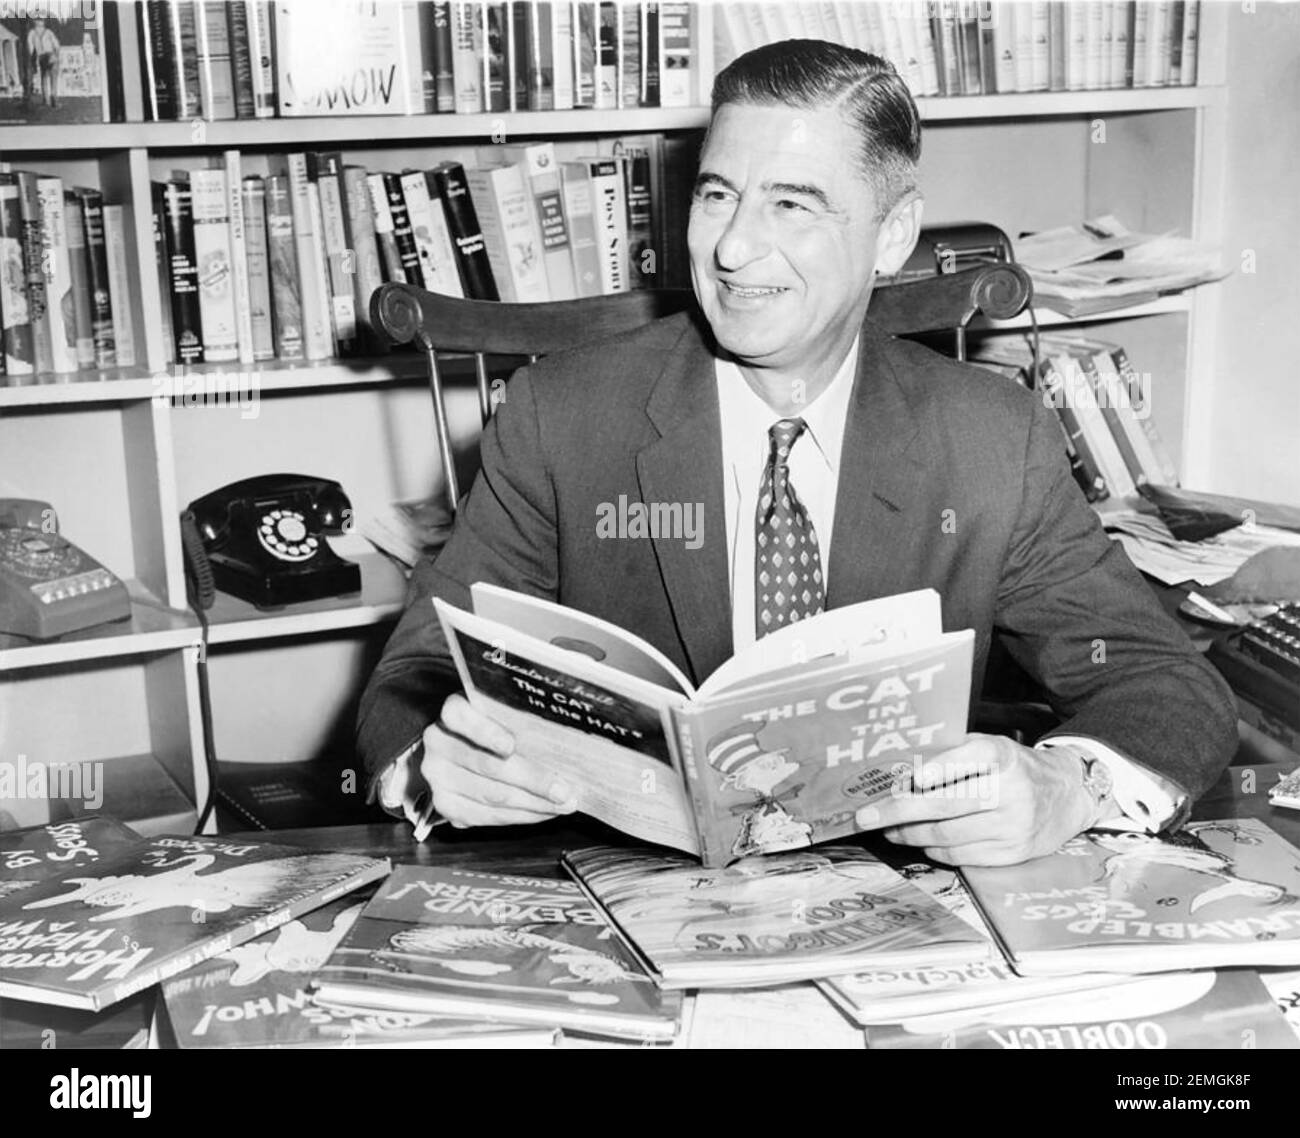 THEODOR SEUSS GEISEL - aka Dr. Seuss - (1904-1991) American children's author and illustrator in 1957 Stock Photo